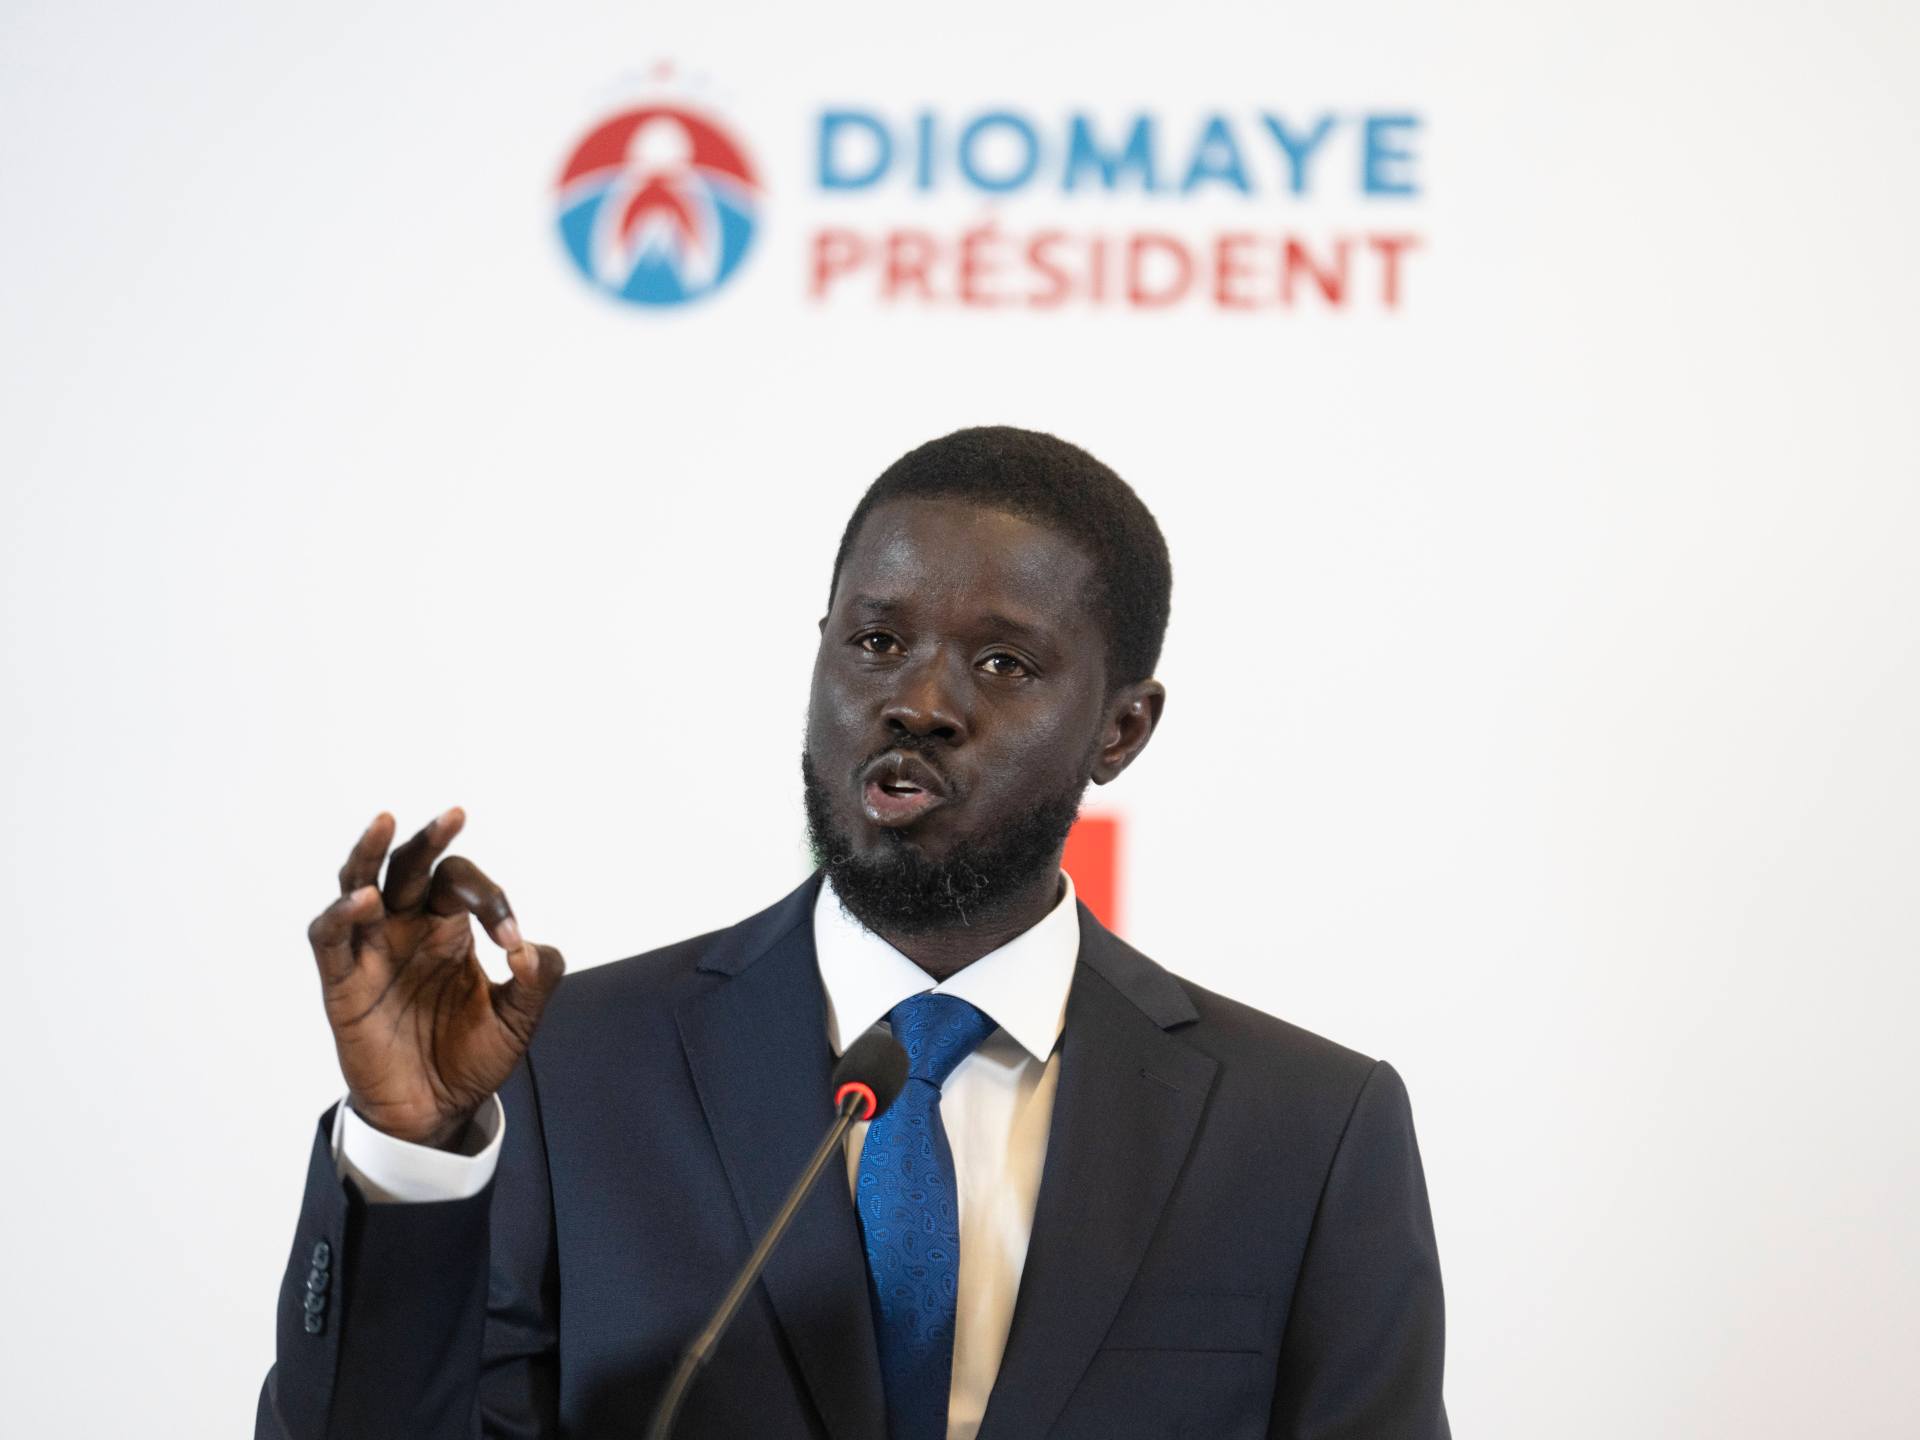 Senegal opposition candidate Faye won 54 percent in presidential vote | Elections News